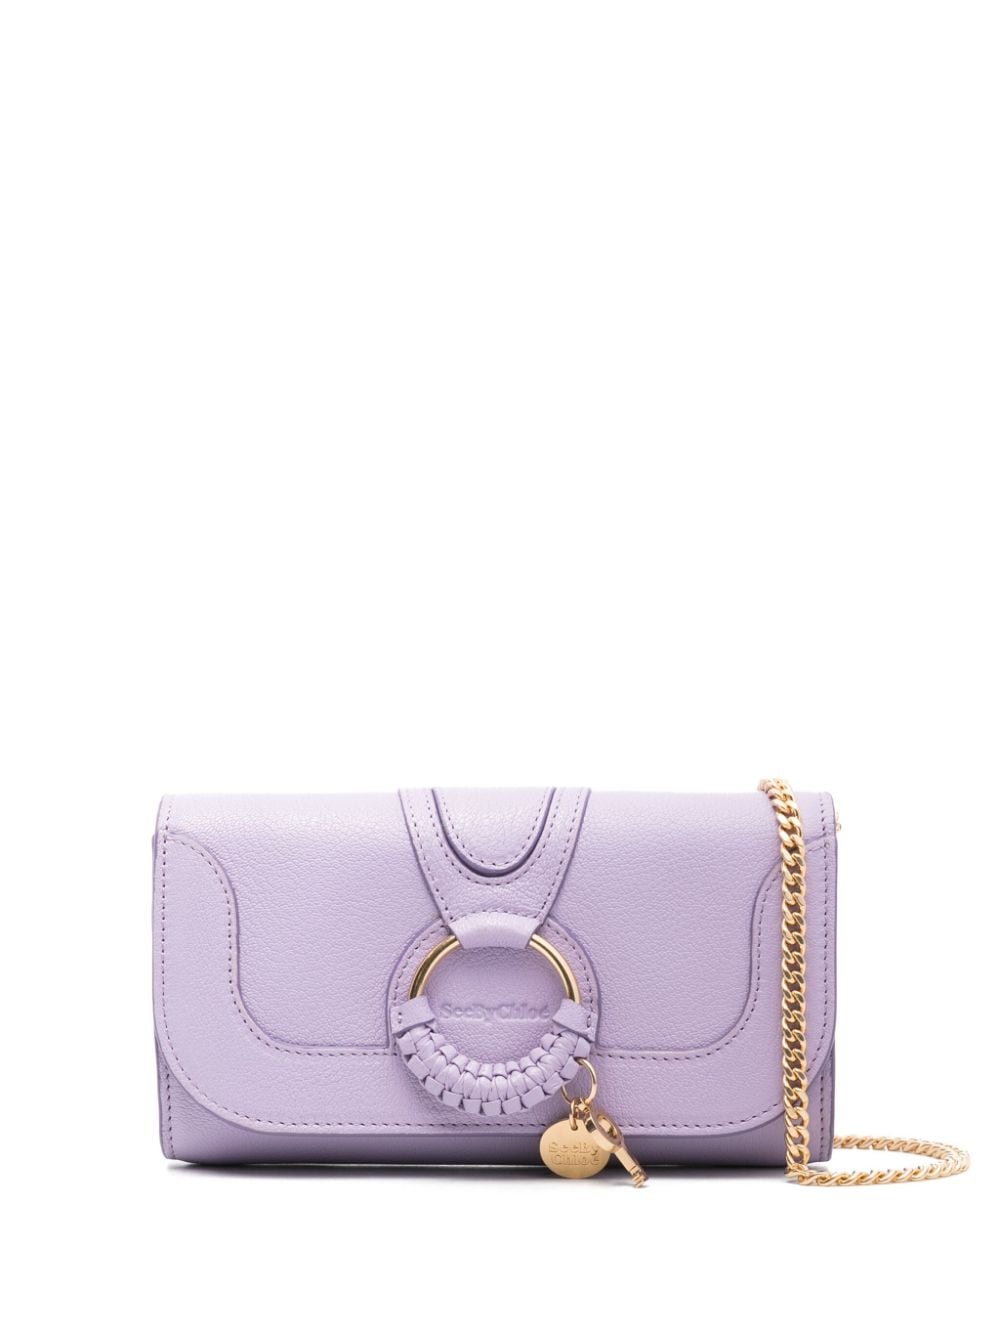 See by Chloé Hana leather chain wallet - Violett